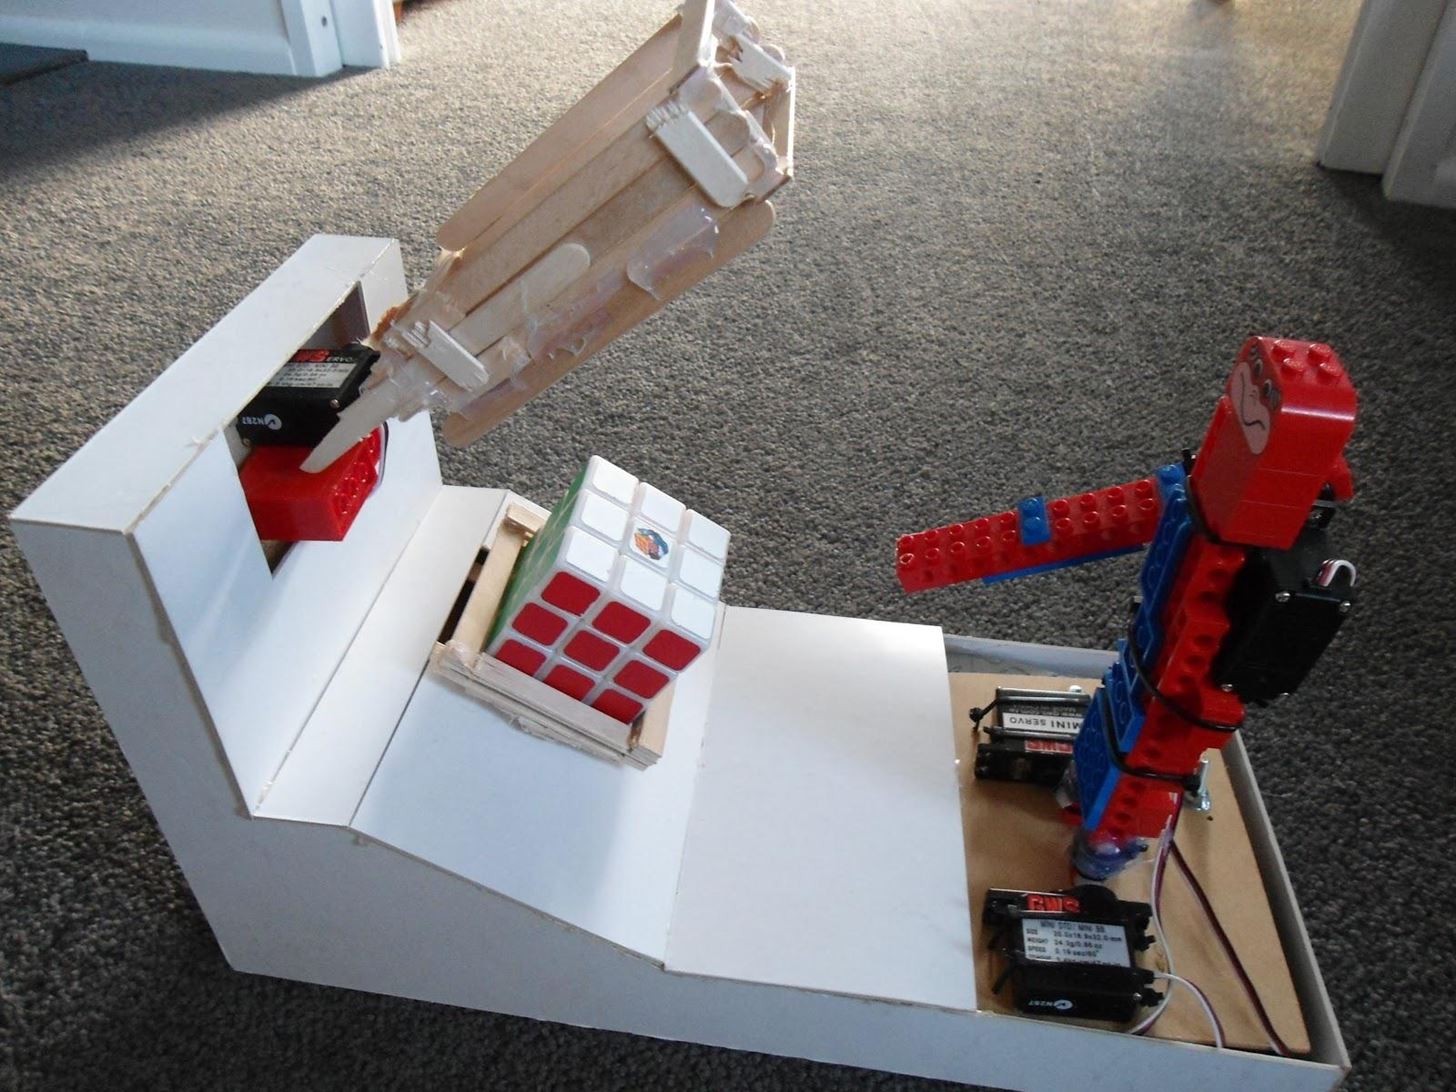 This Simple LEGO and Popsicle Stick Robot Can Solve a Rubik's Cube in 100 Moves or Less